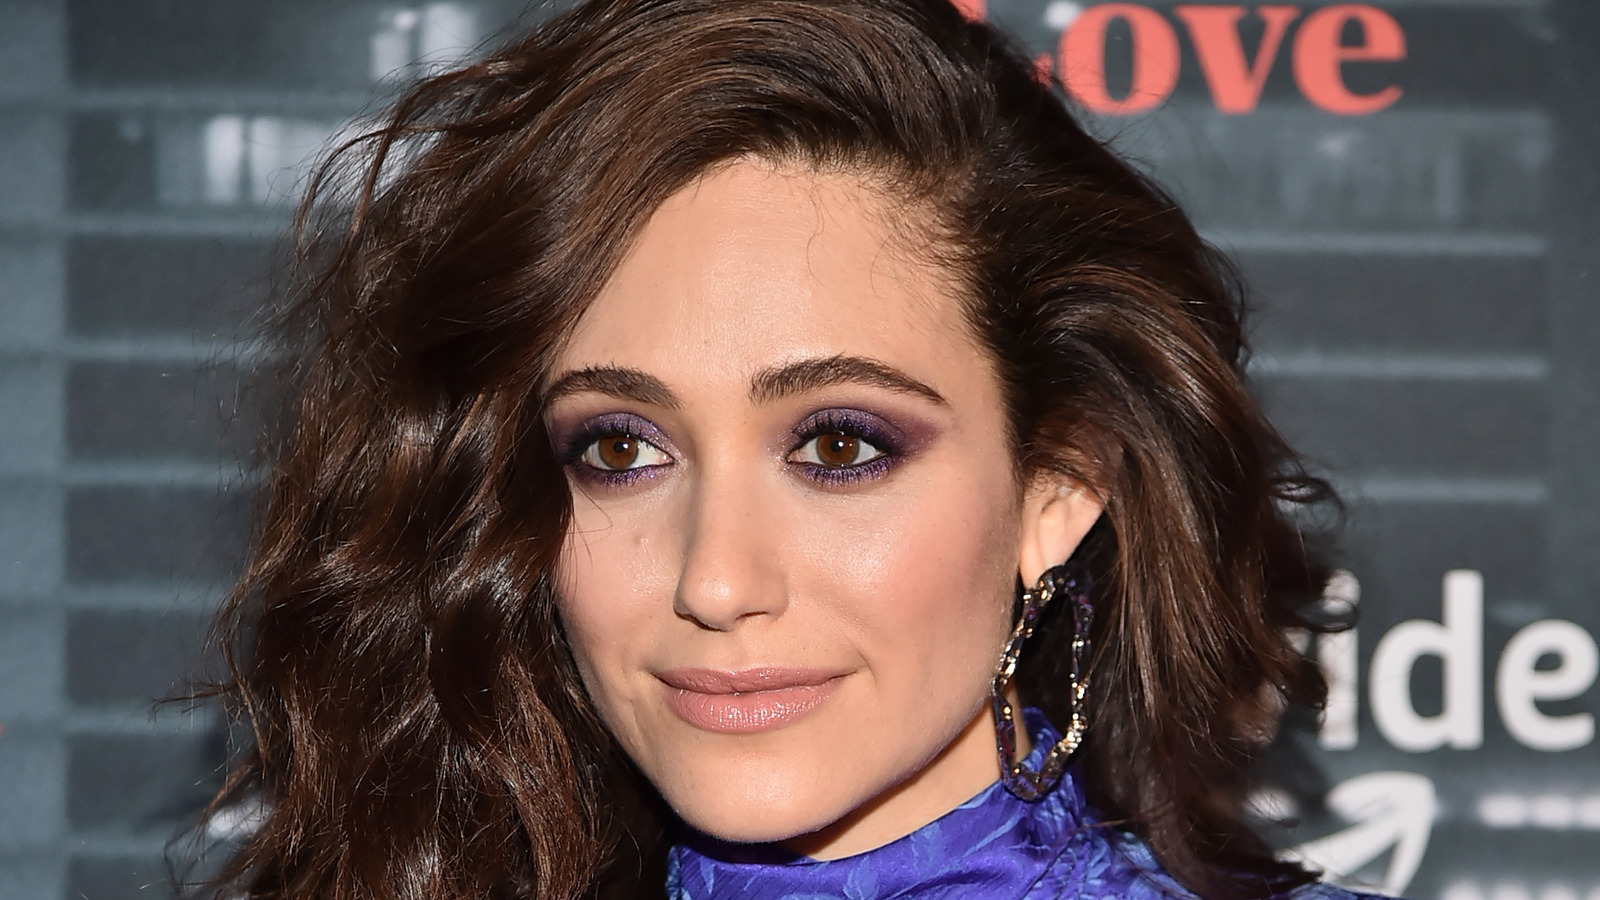 Emmy Rossum's Transformation Has Stunned Just About Everyone